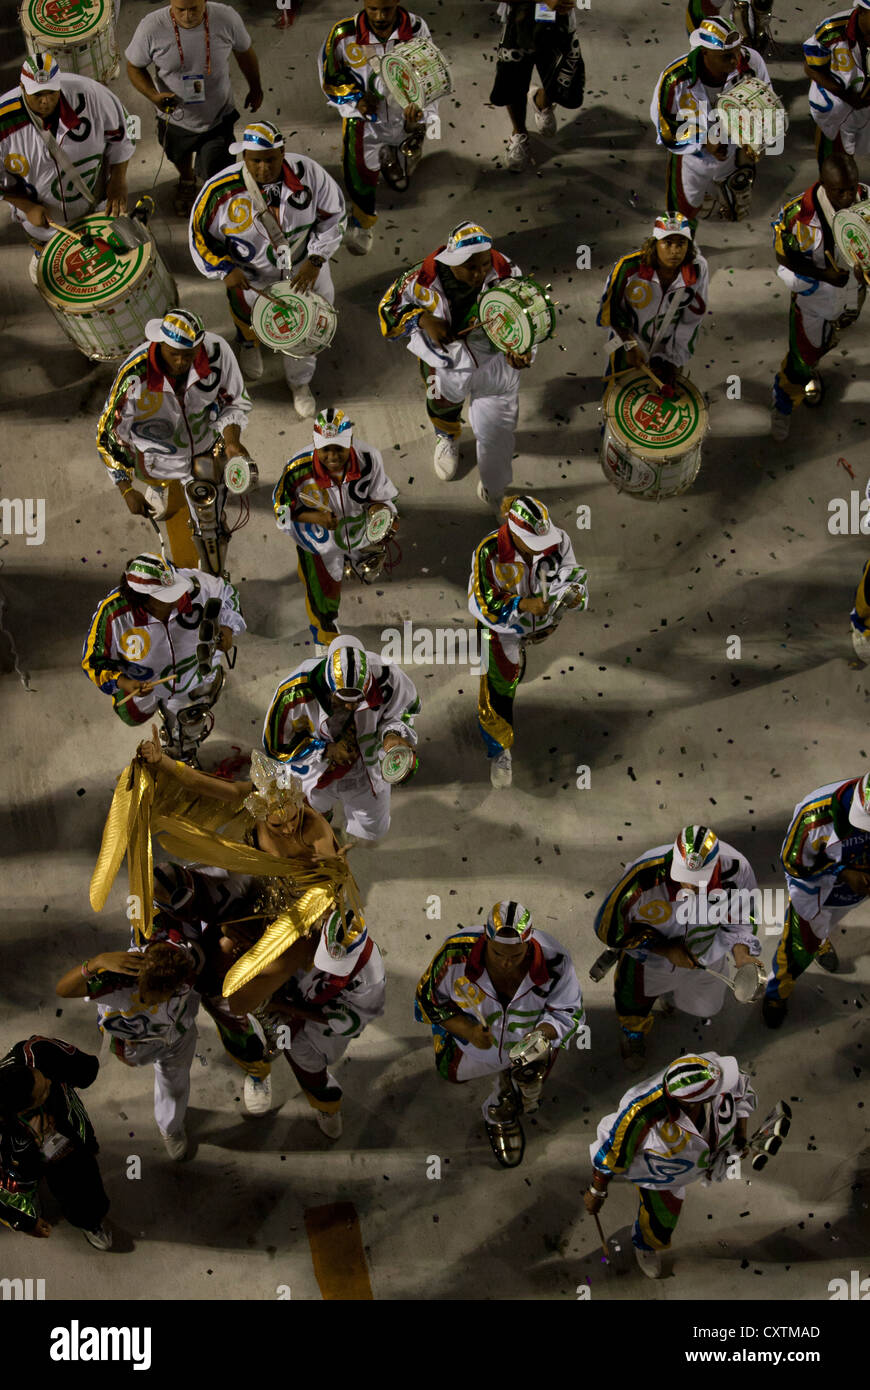 Woman carried by the Drummers during Carnival Parade Rio de Janeiro Brazil Stock Photo